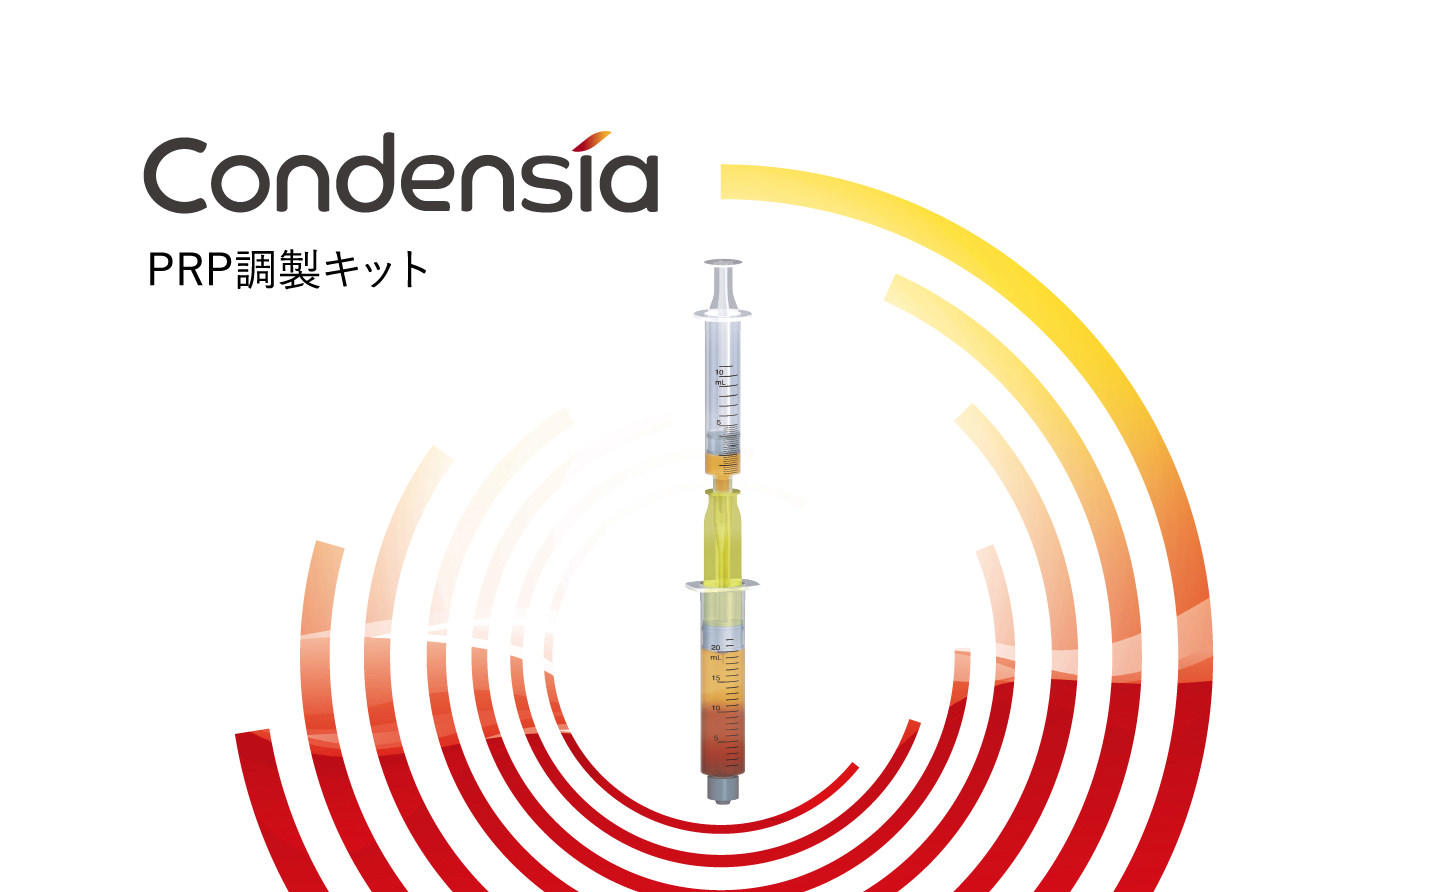 Condensia PRP調製キット